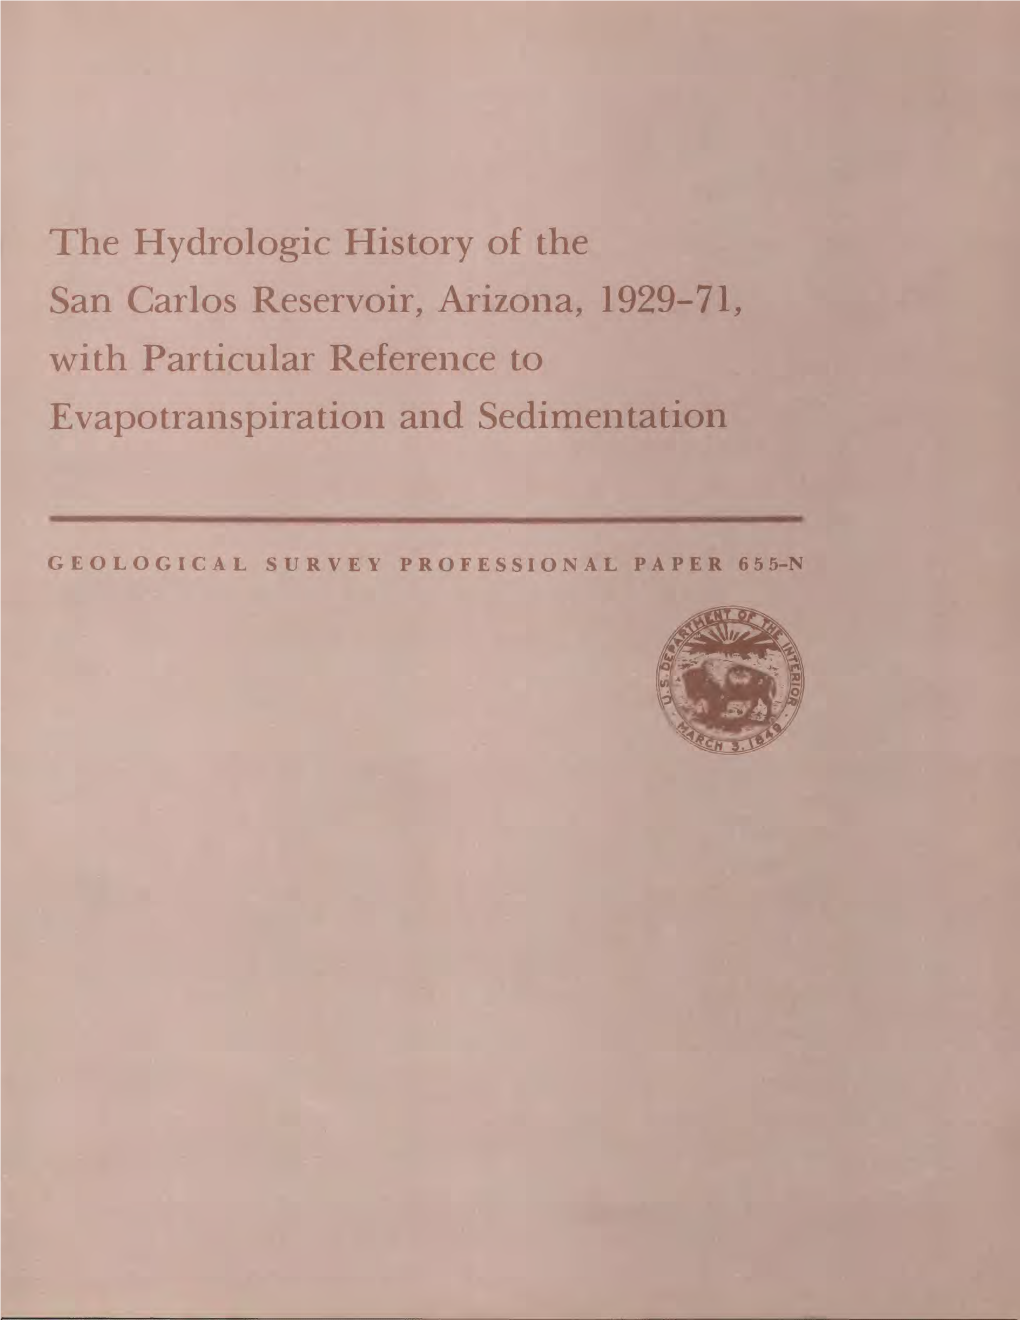 The Hydrologic History of the San Carlos Reservoir, Arizona, 1929-71, with Particular Reference to Evapotranspiration and Sedimentation